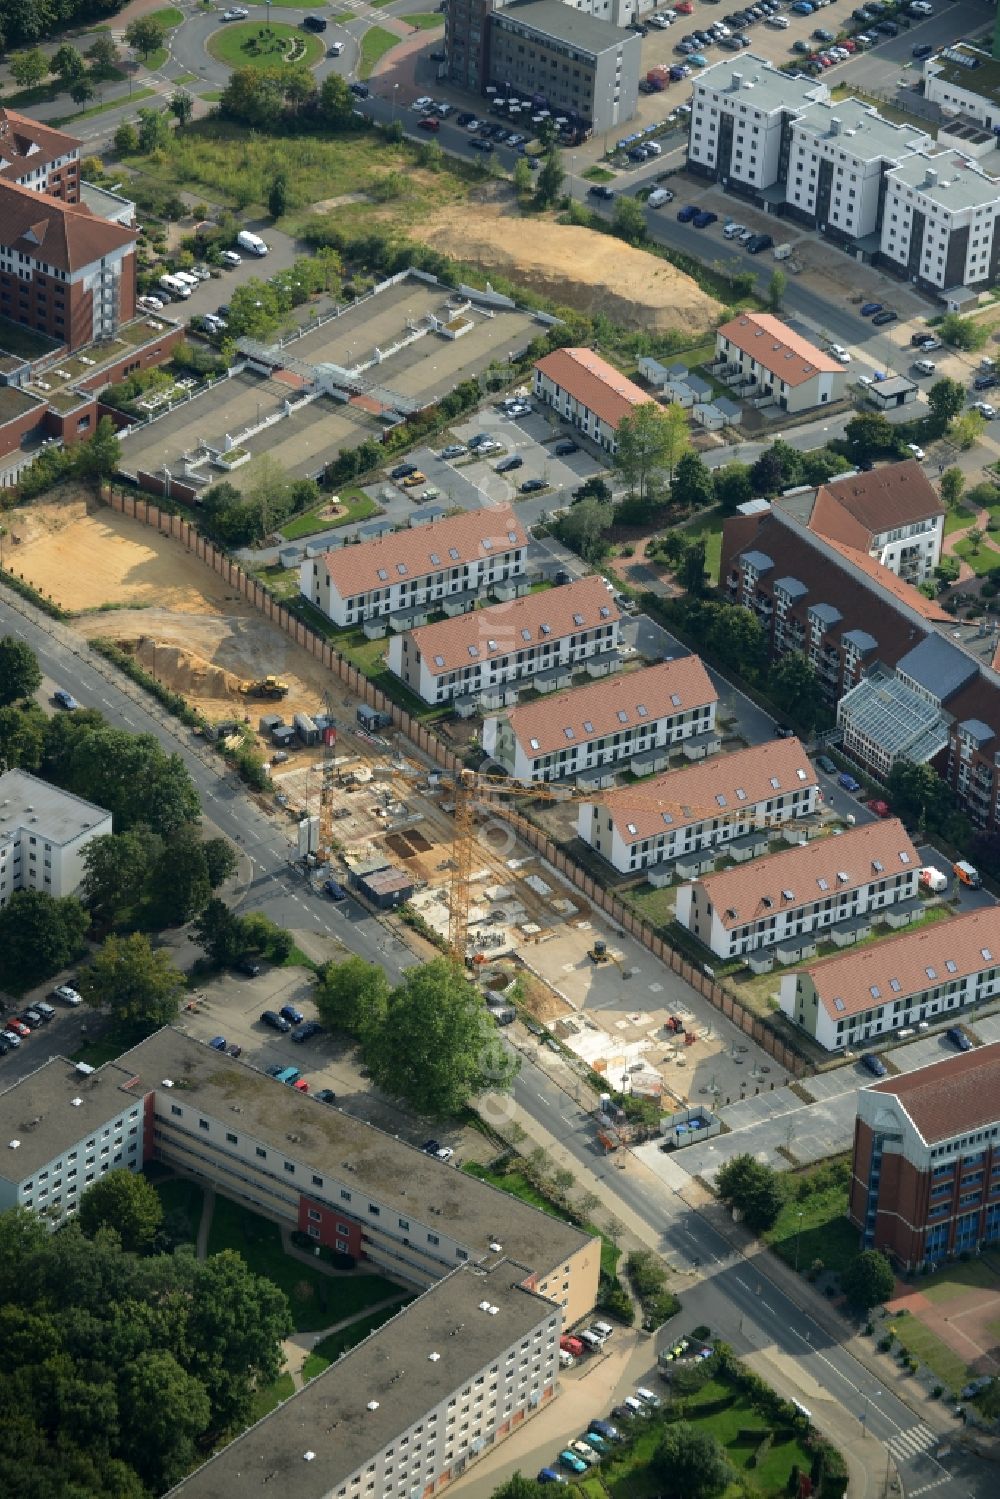 Aerial image Laatzen - Construction site to build a new multi-family residential complex Gutenbergquartier in Laatzen in the state of Lower Saxony. Five new townhouses are being built next to a newly developed residential area